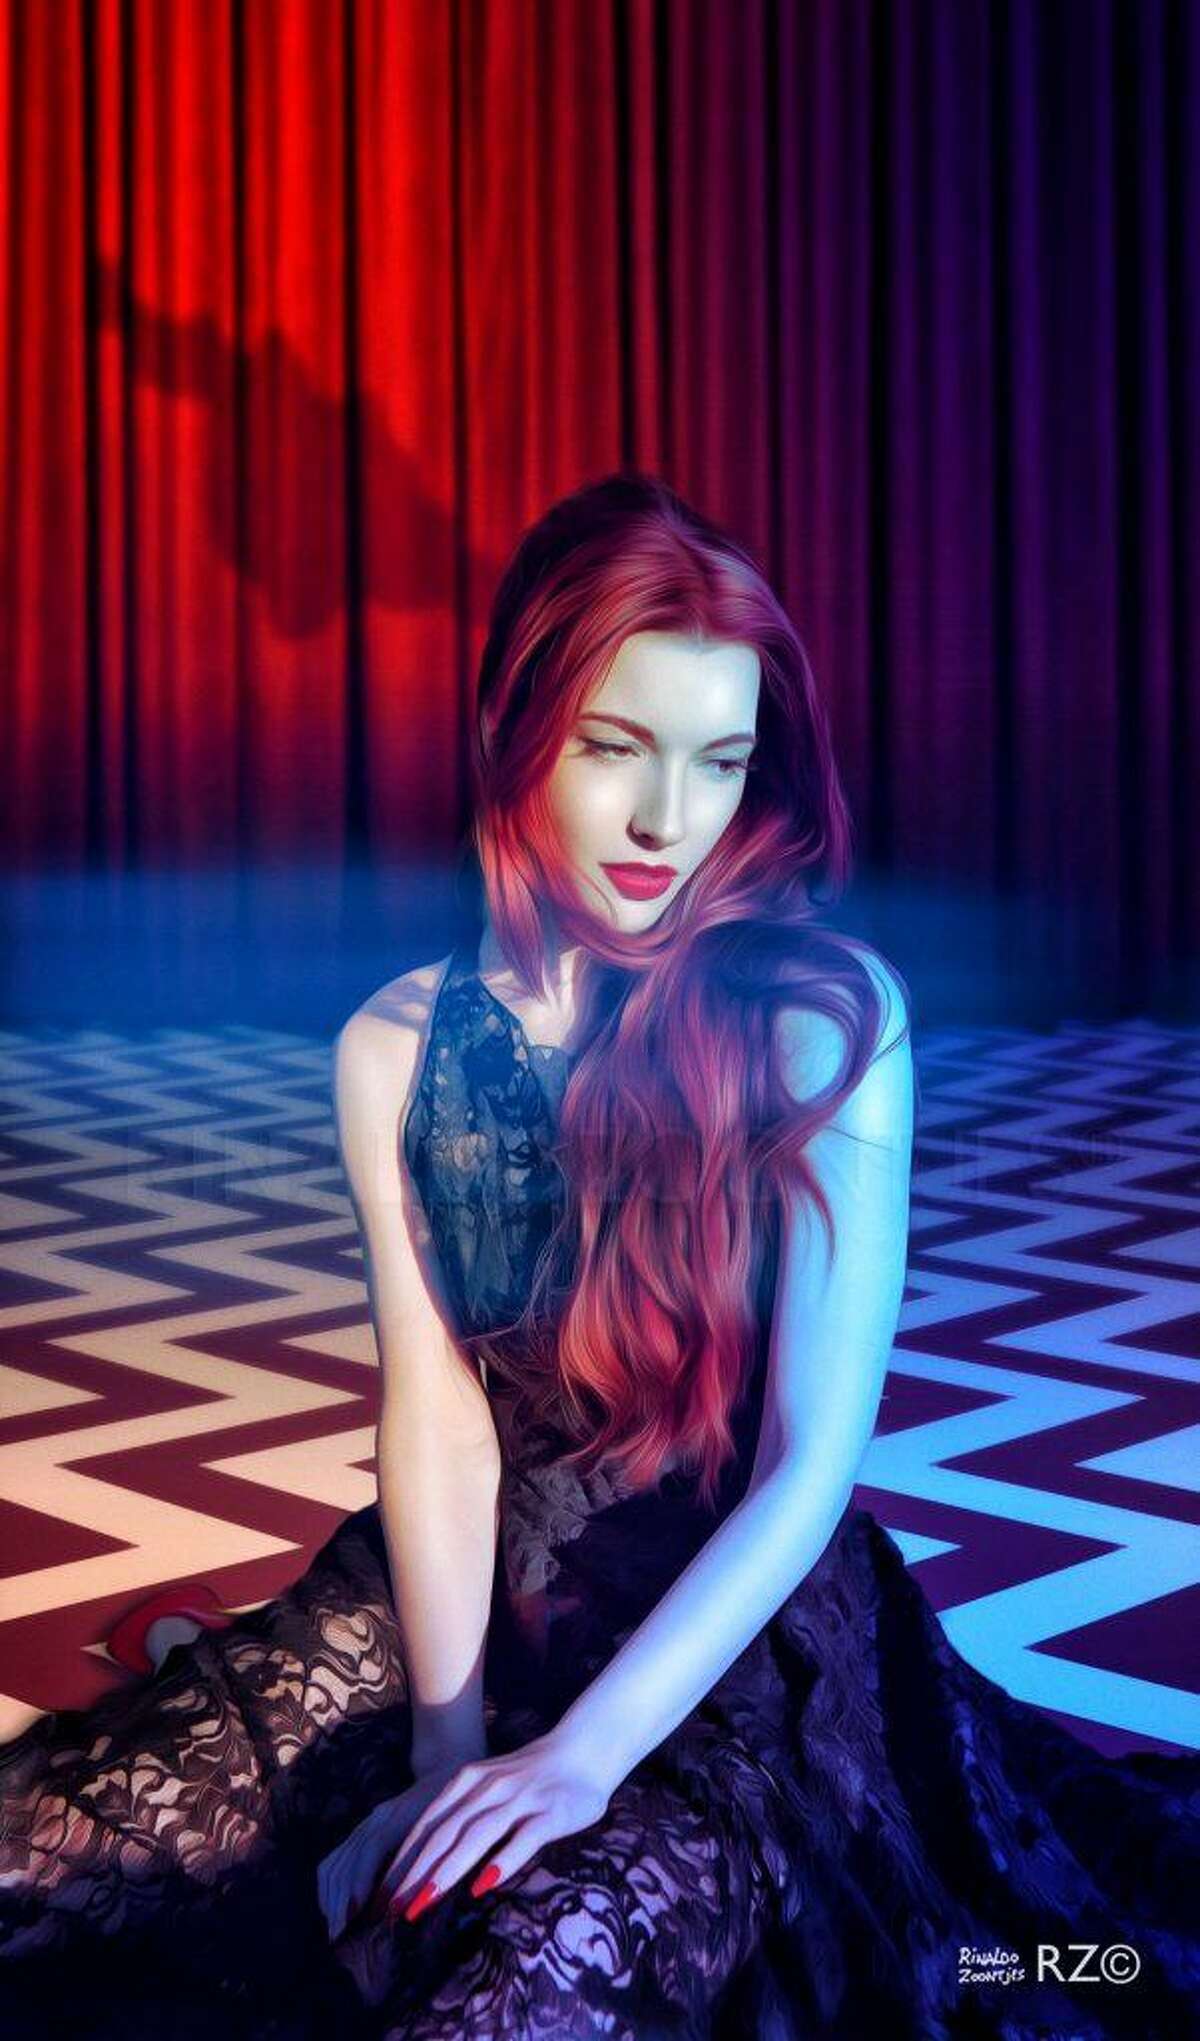 "Chrysta Bell in the Lodge" is a "Twin Peaks"-inspired rendering by artist Rinaldo Zoontjes.